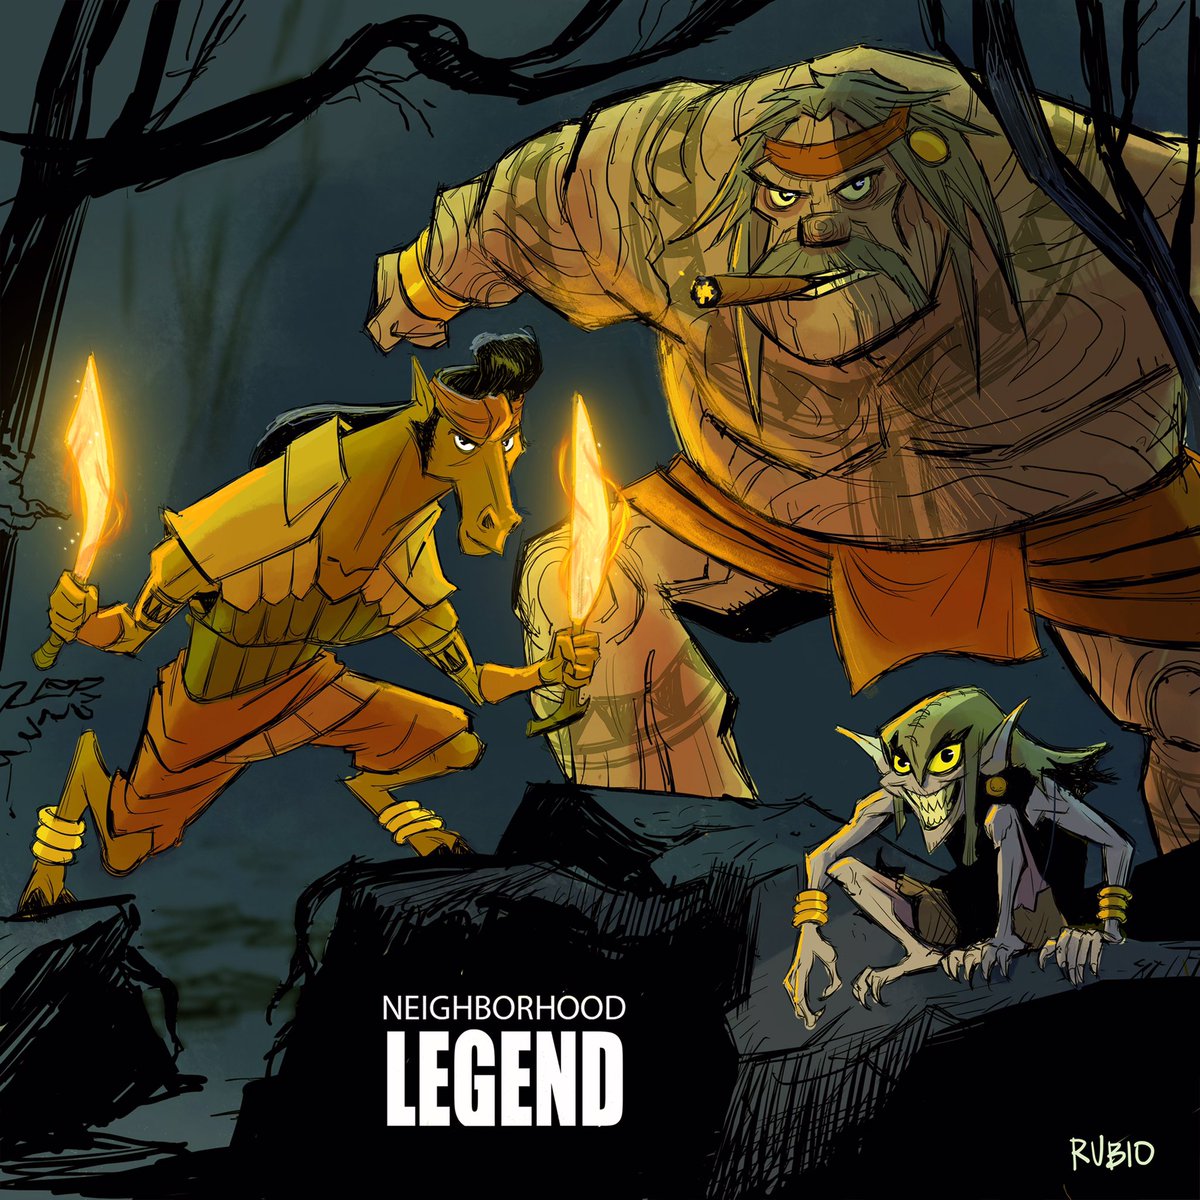 May is #AsianAmericanPacificIslanderHeritageMonth

I am #FilipinoAmerican and this is my #passionproject the #NeighborhoodLegend. It is a #Fantasy #ActionAdventure that features #FilipinoMartialArts and #FilipinoMythology!

instagram.com/p/CsRD-OGrU3A/…